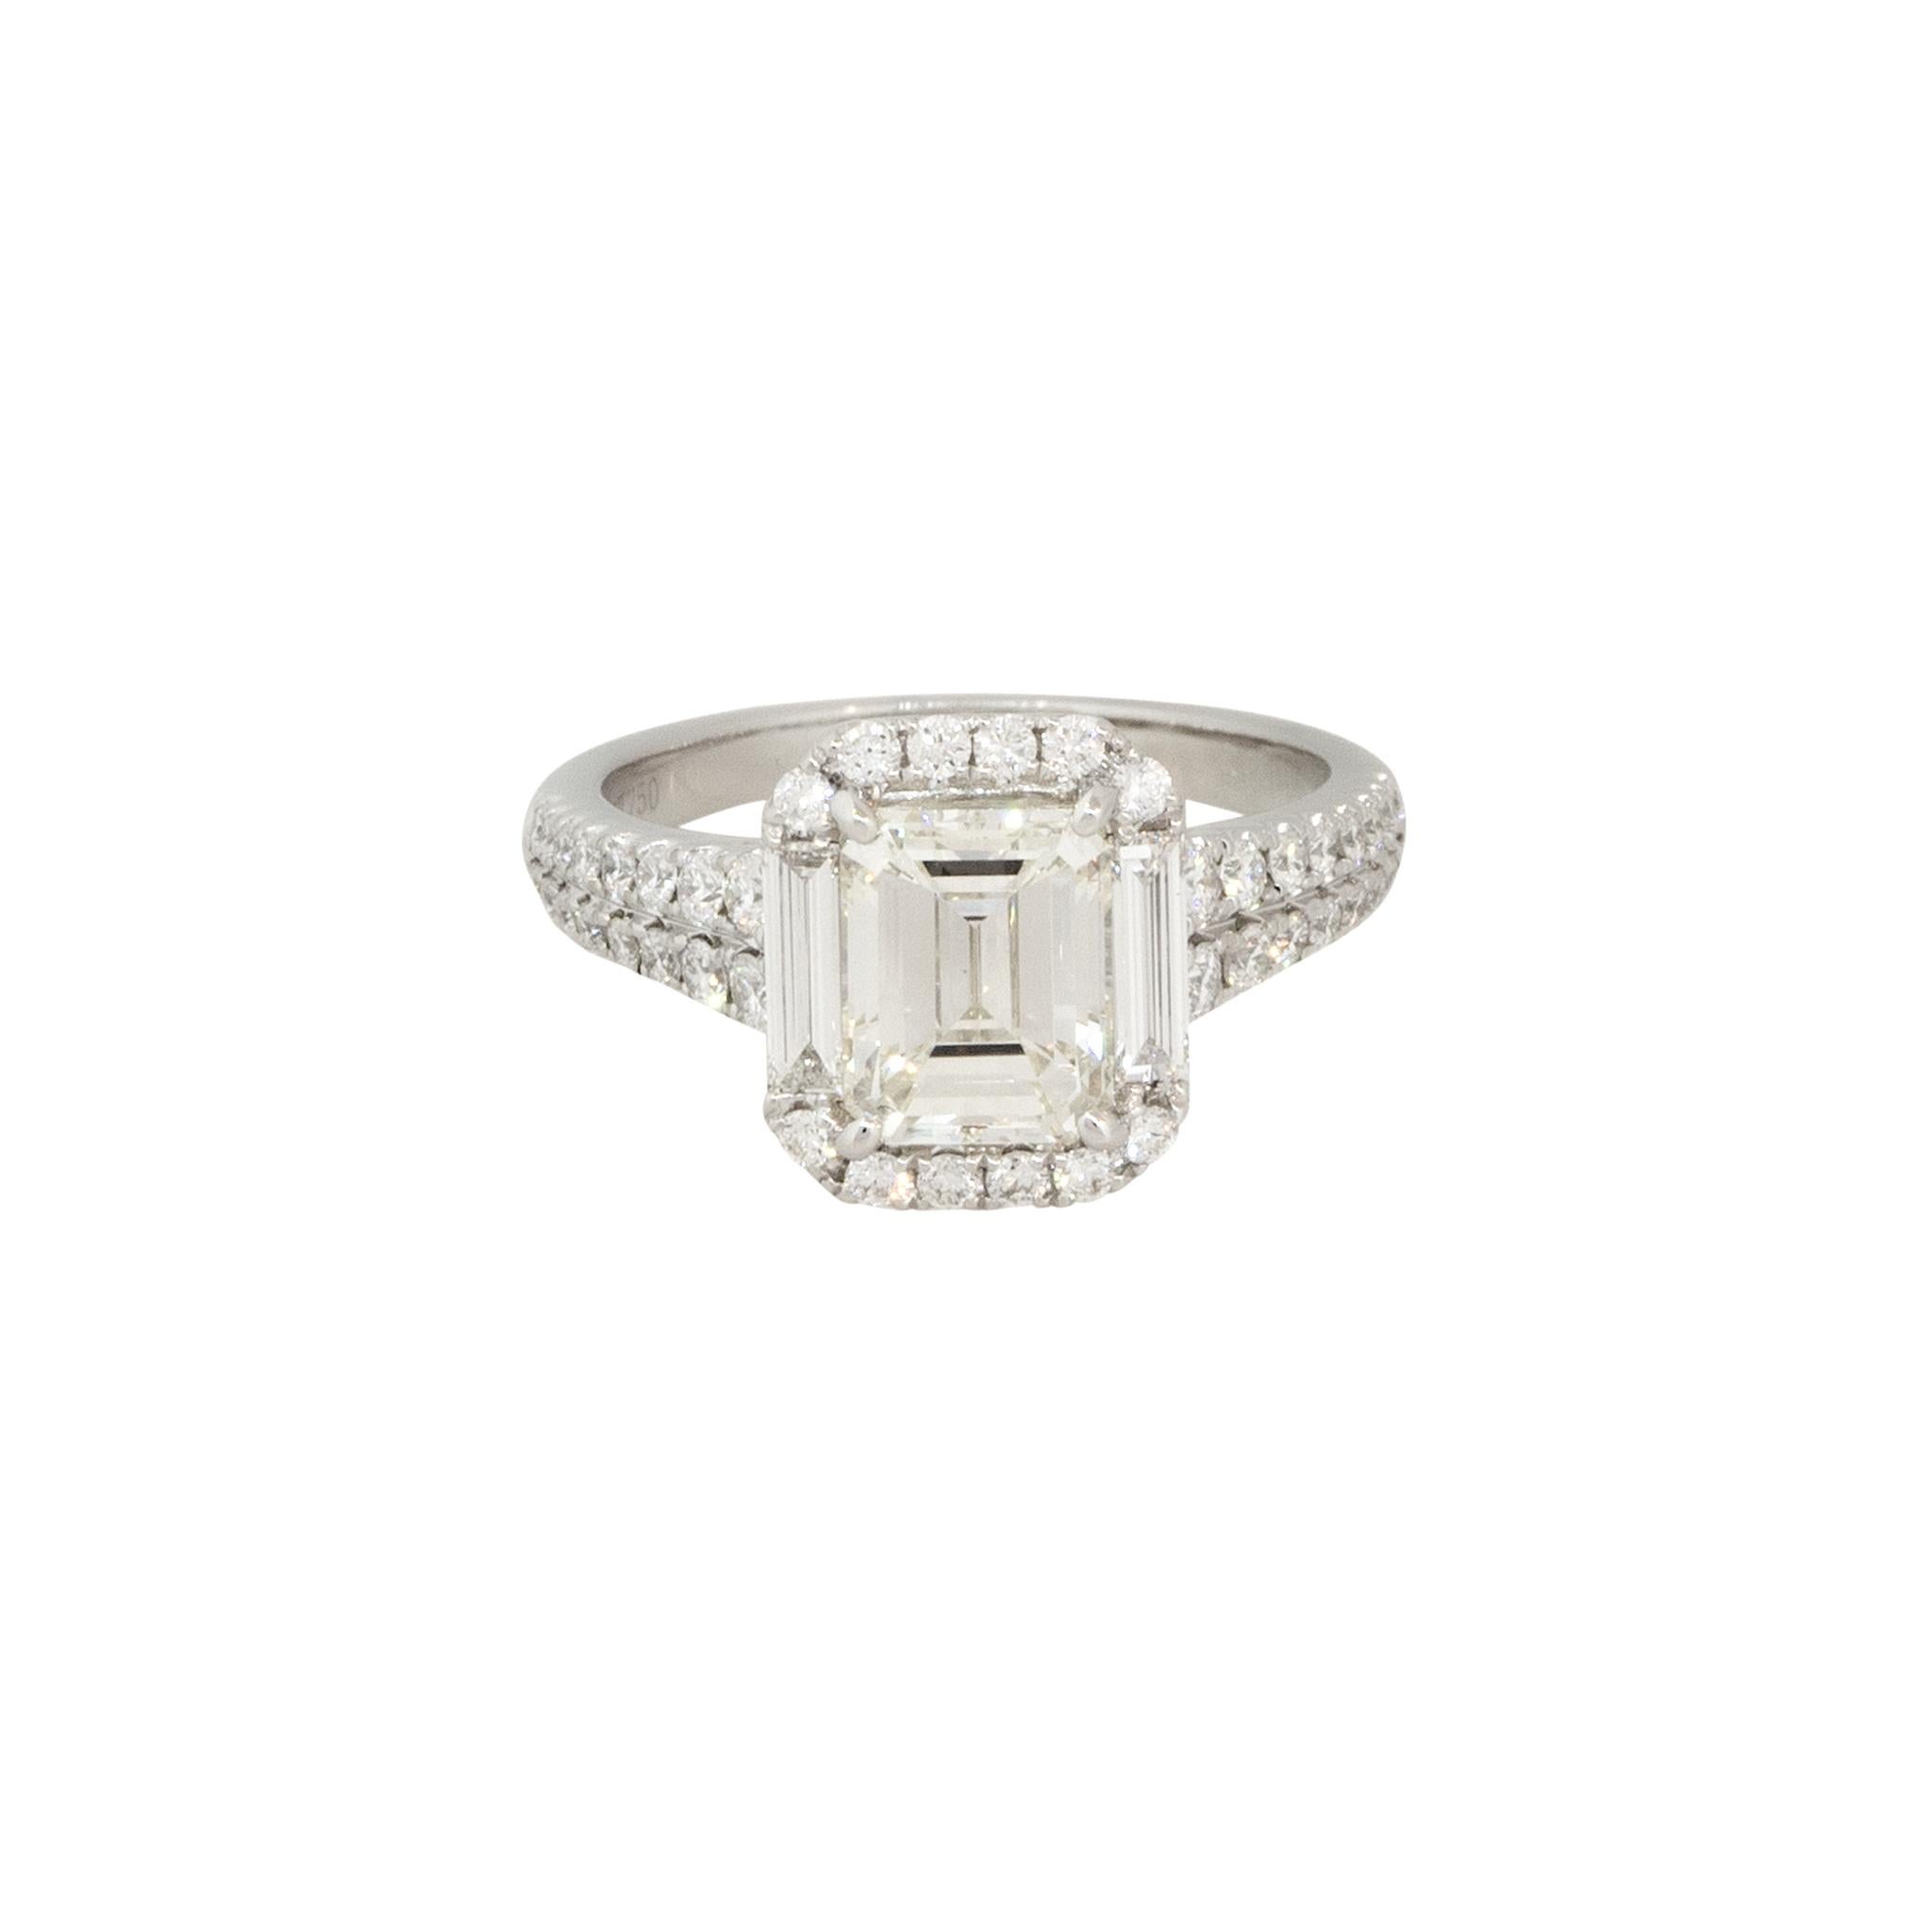 2.87 Carat Emerald Cut Diamond Halo Engagement Ring 18 Karat in Stock In Excellent Condition For Sale In Boca Raton, FL